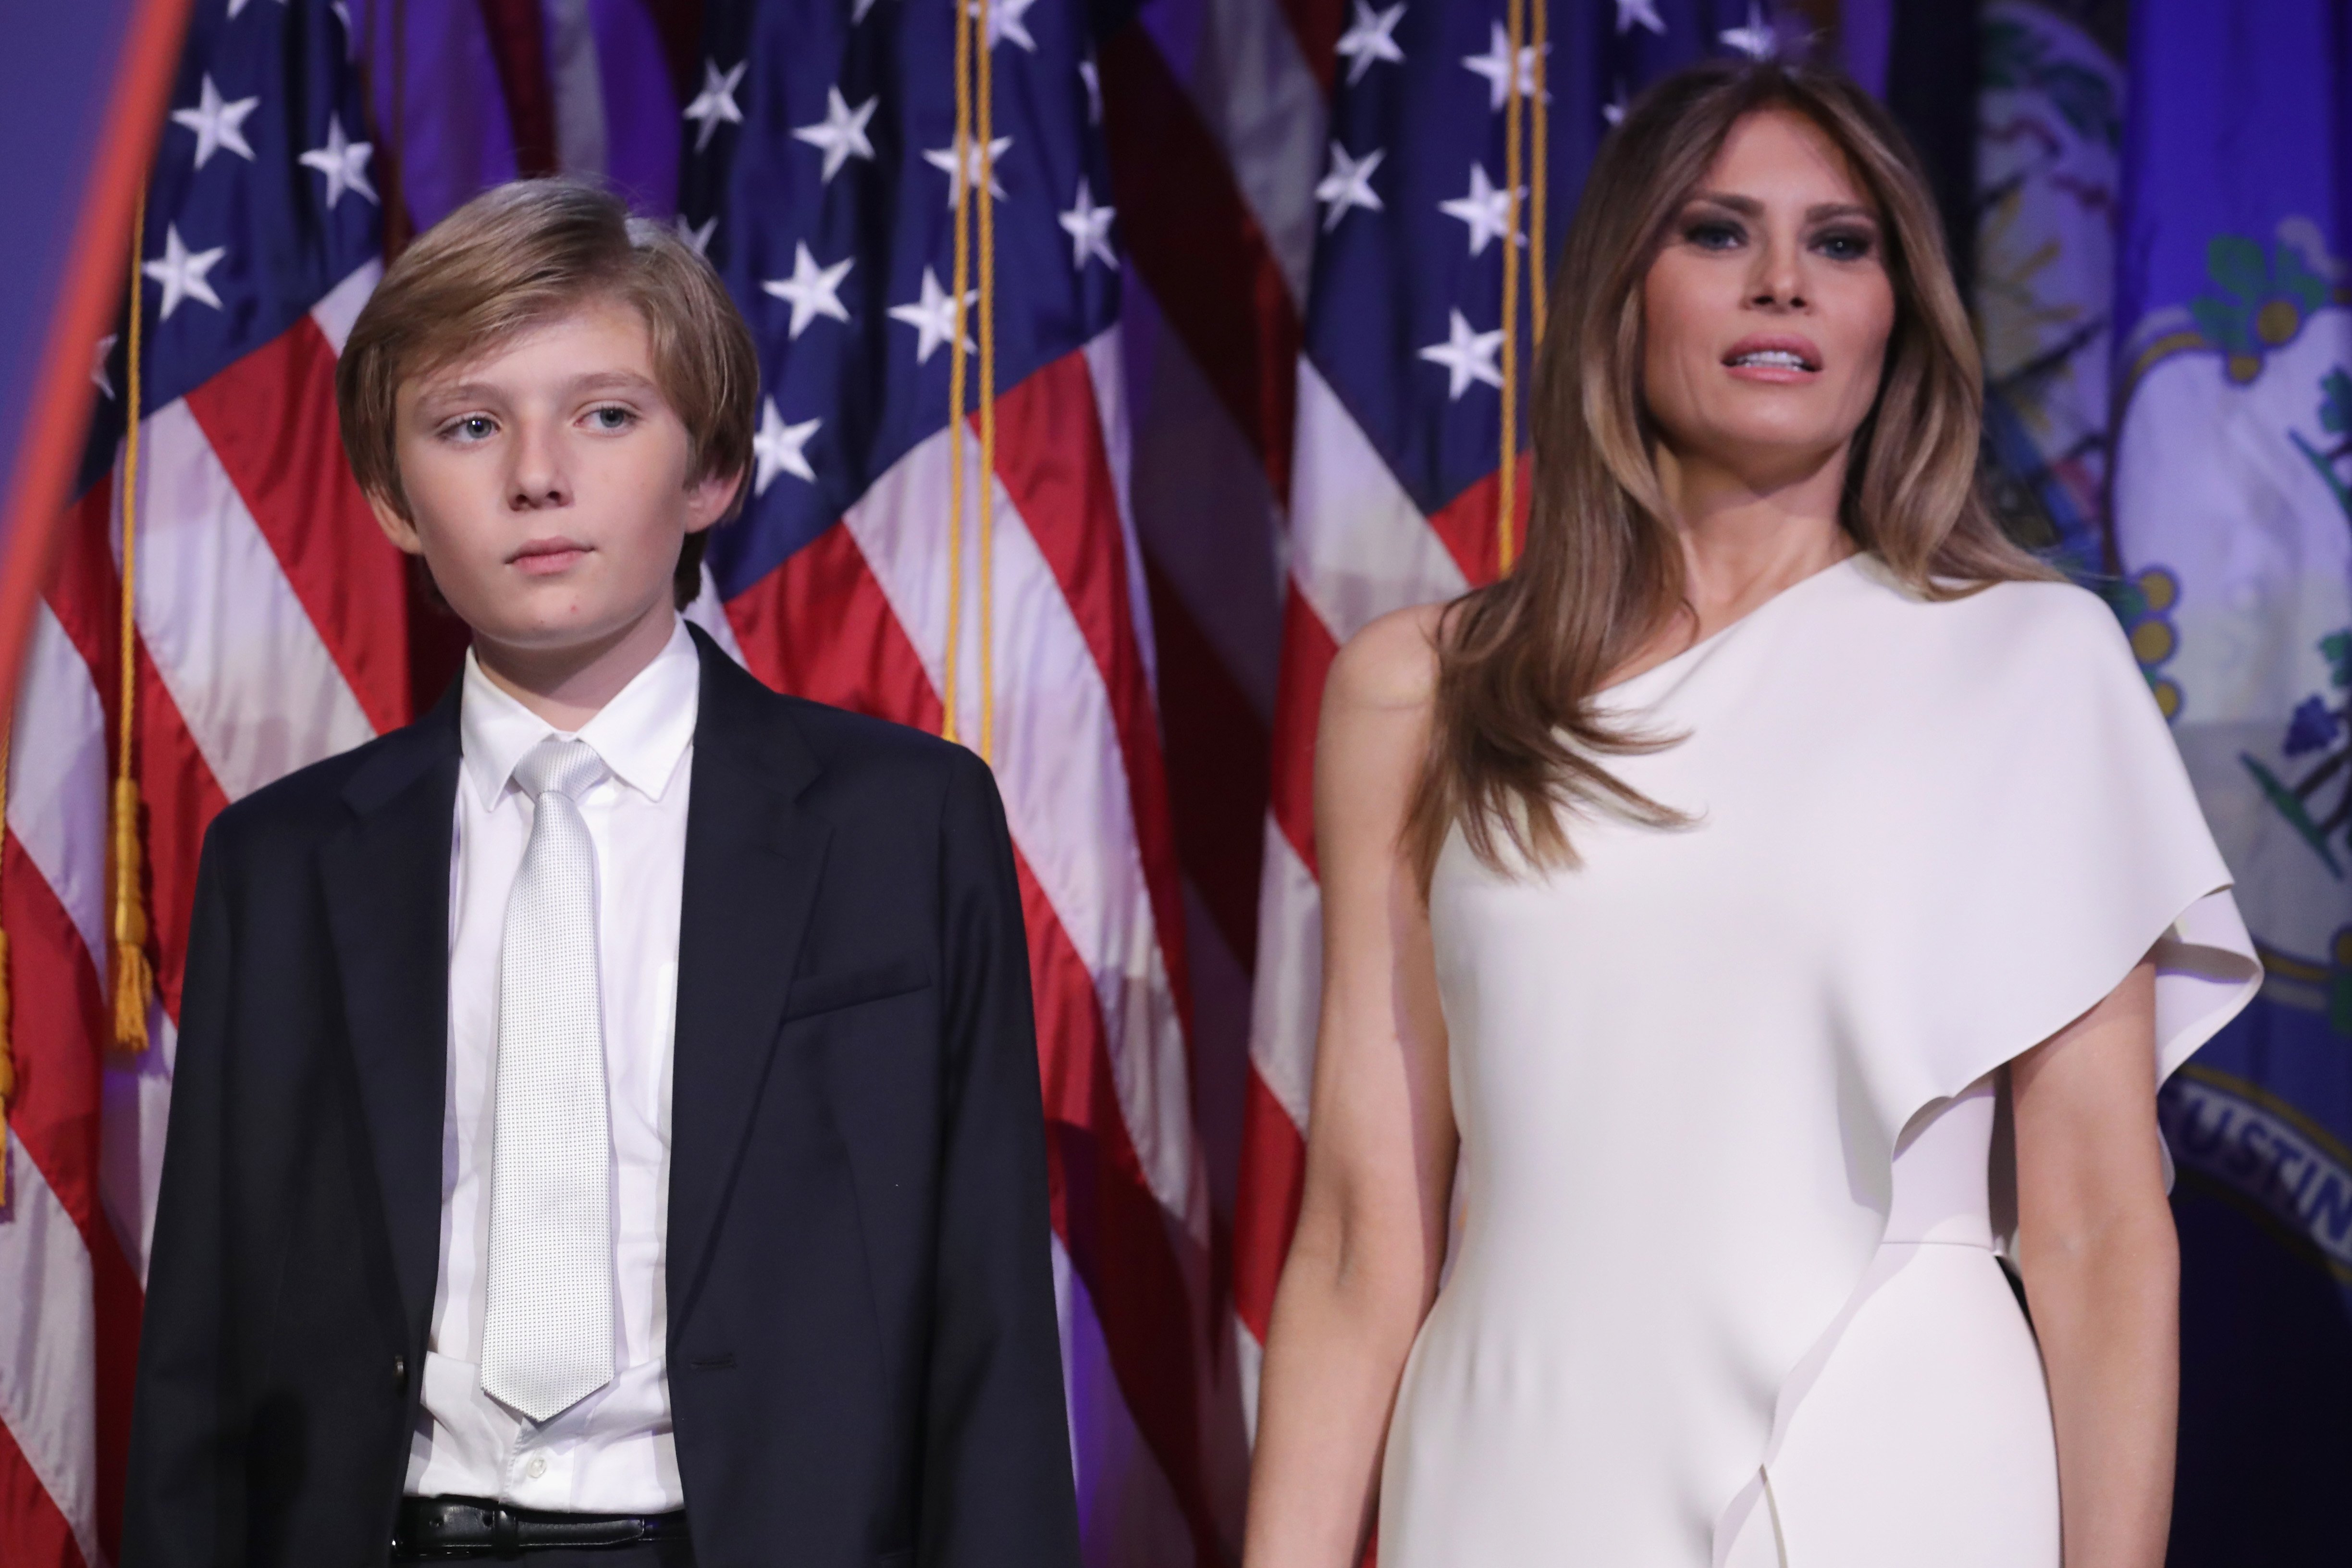 Barron Trump and Melania Trump at the New York Hilton Midtown in the early morning hours of November 9, 2016 | Photo: GettyImages